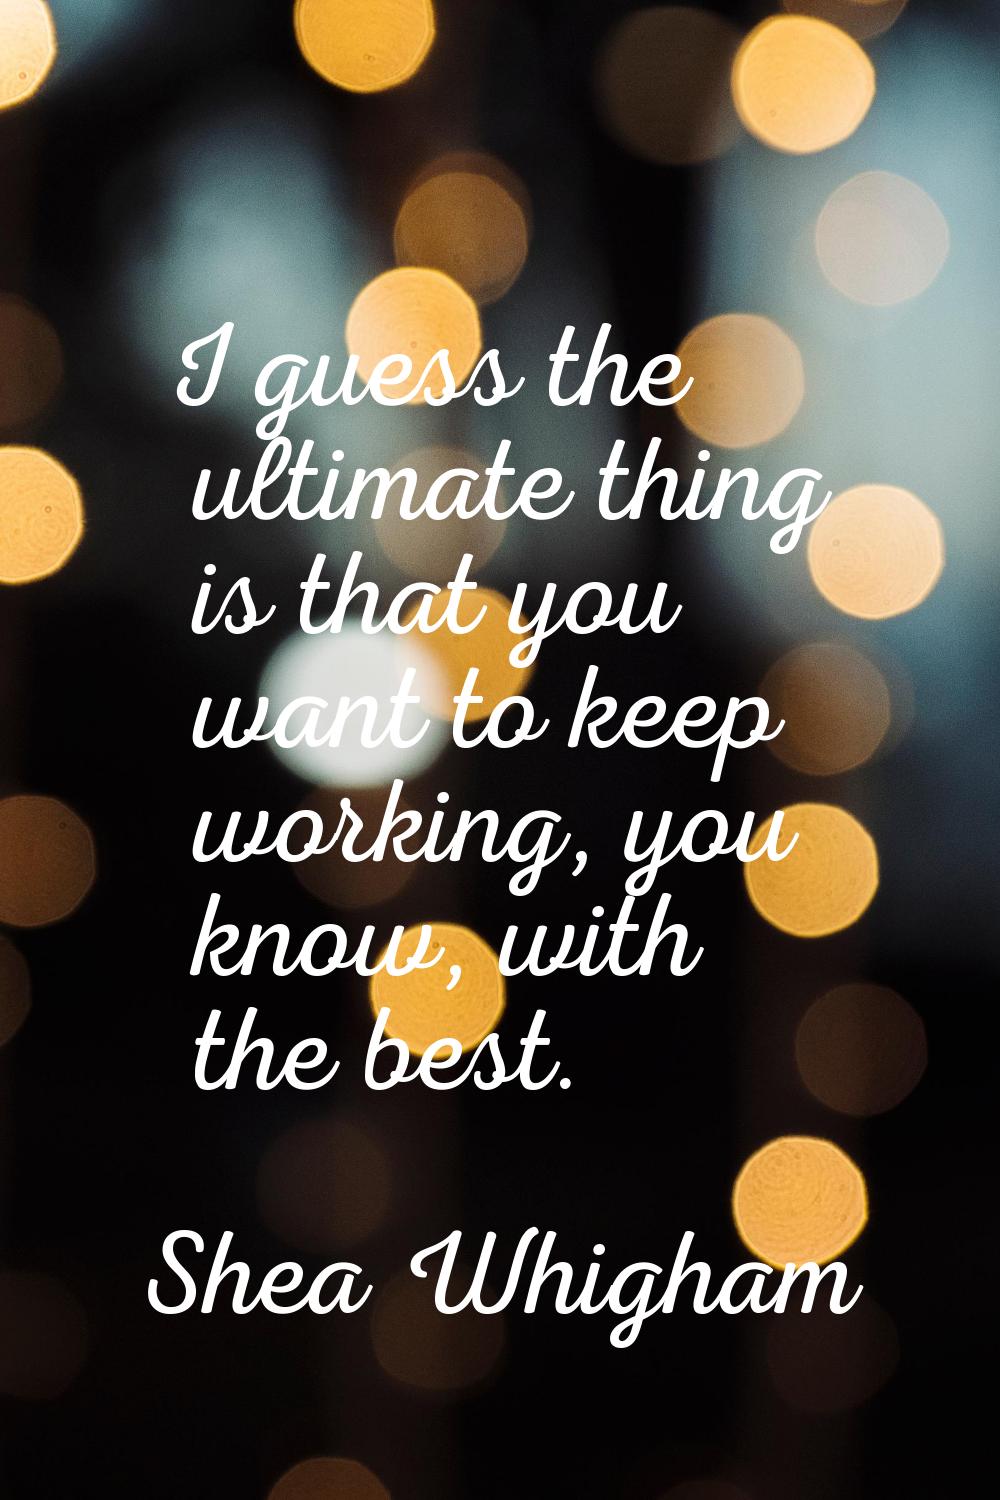 I guess the ultimate thing is that you want to keep working, you know, with the best.